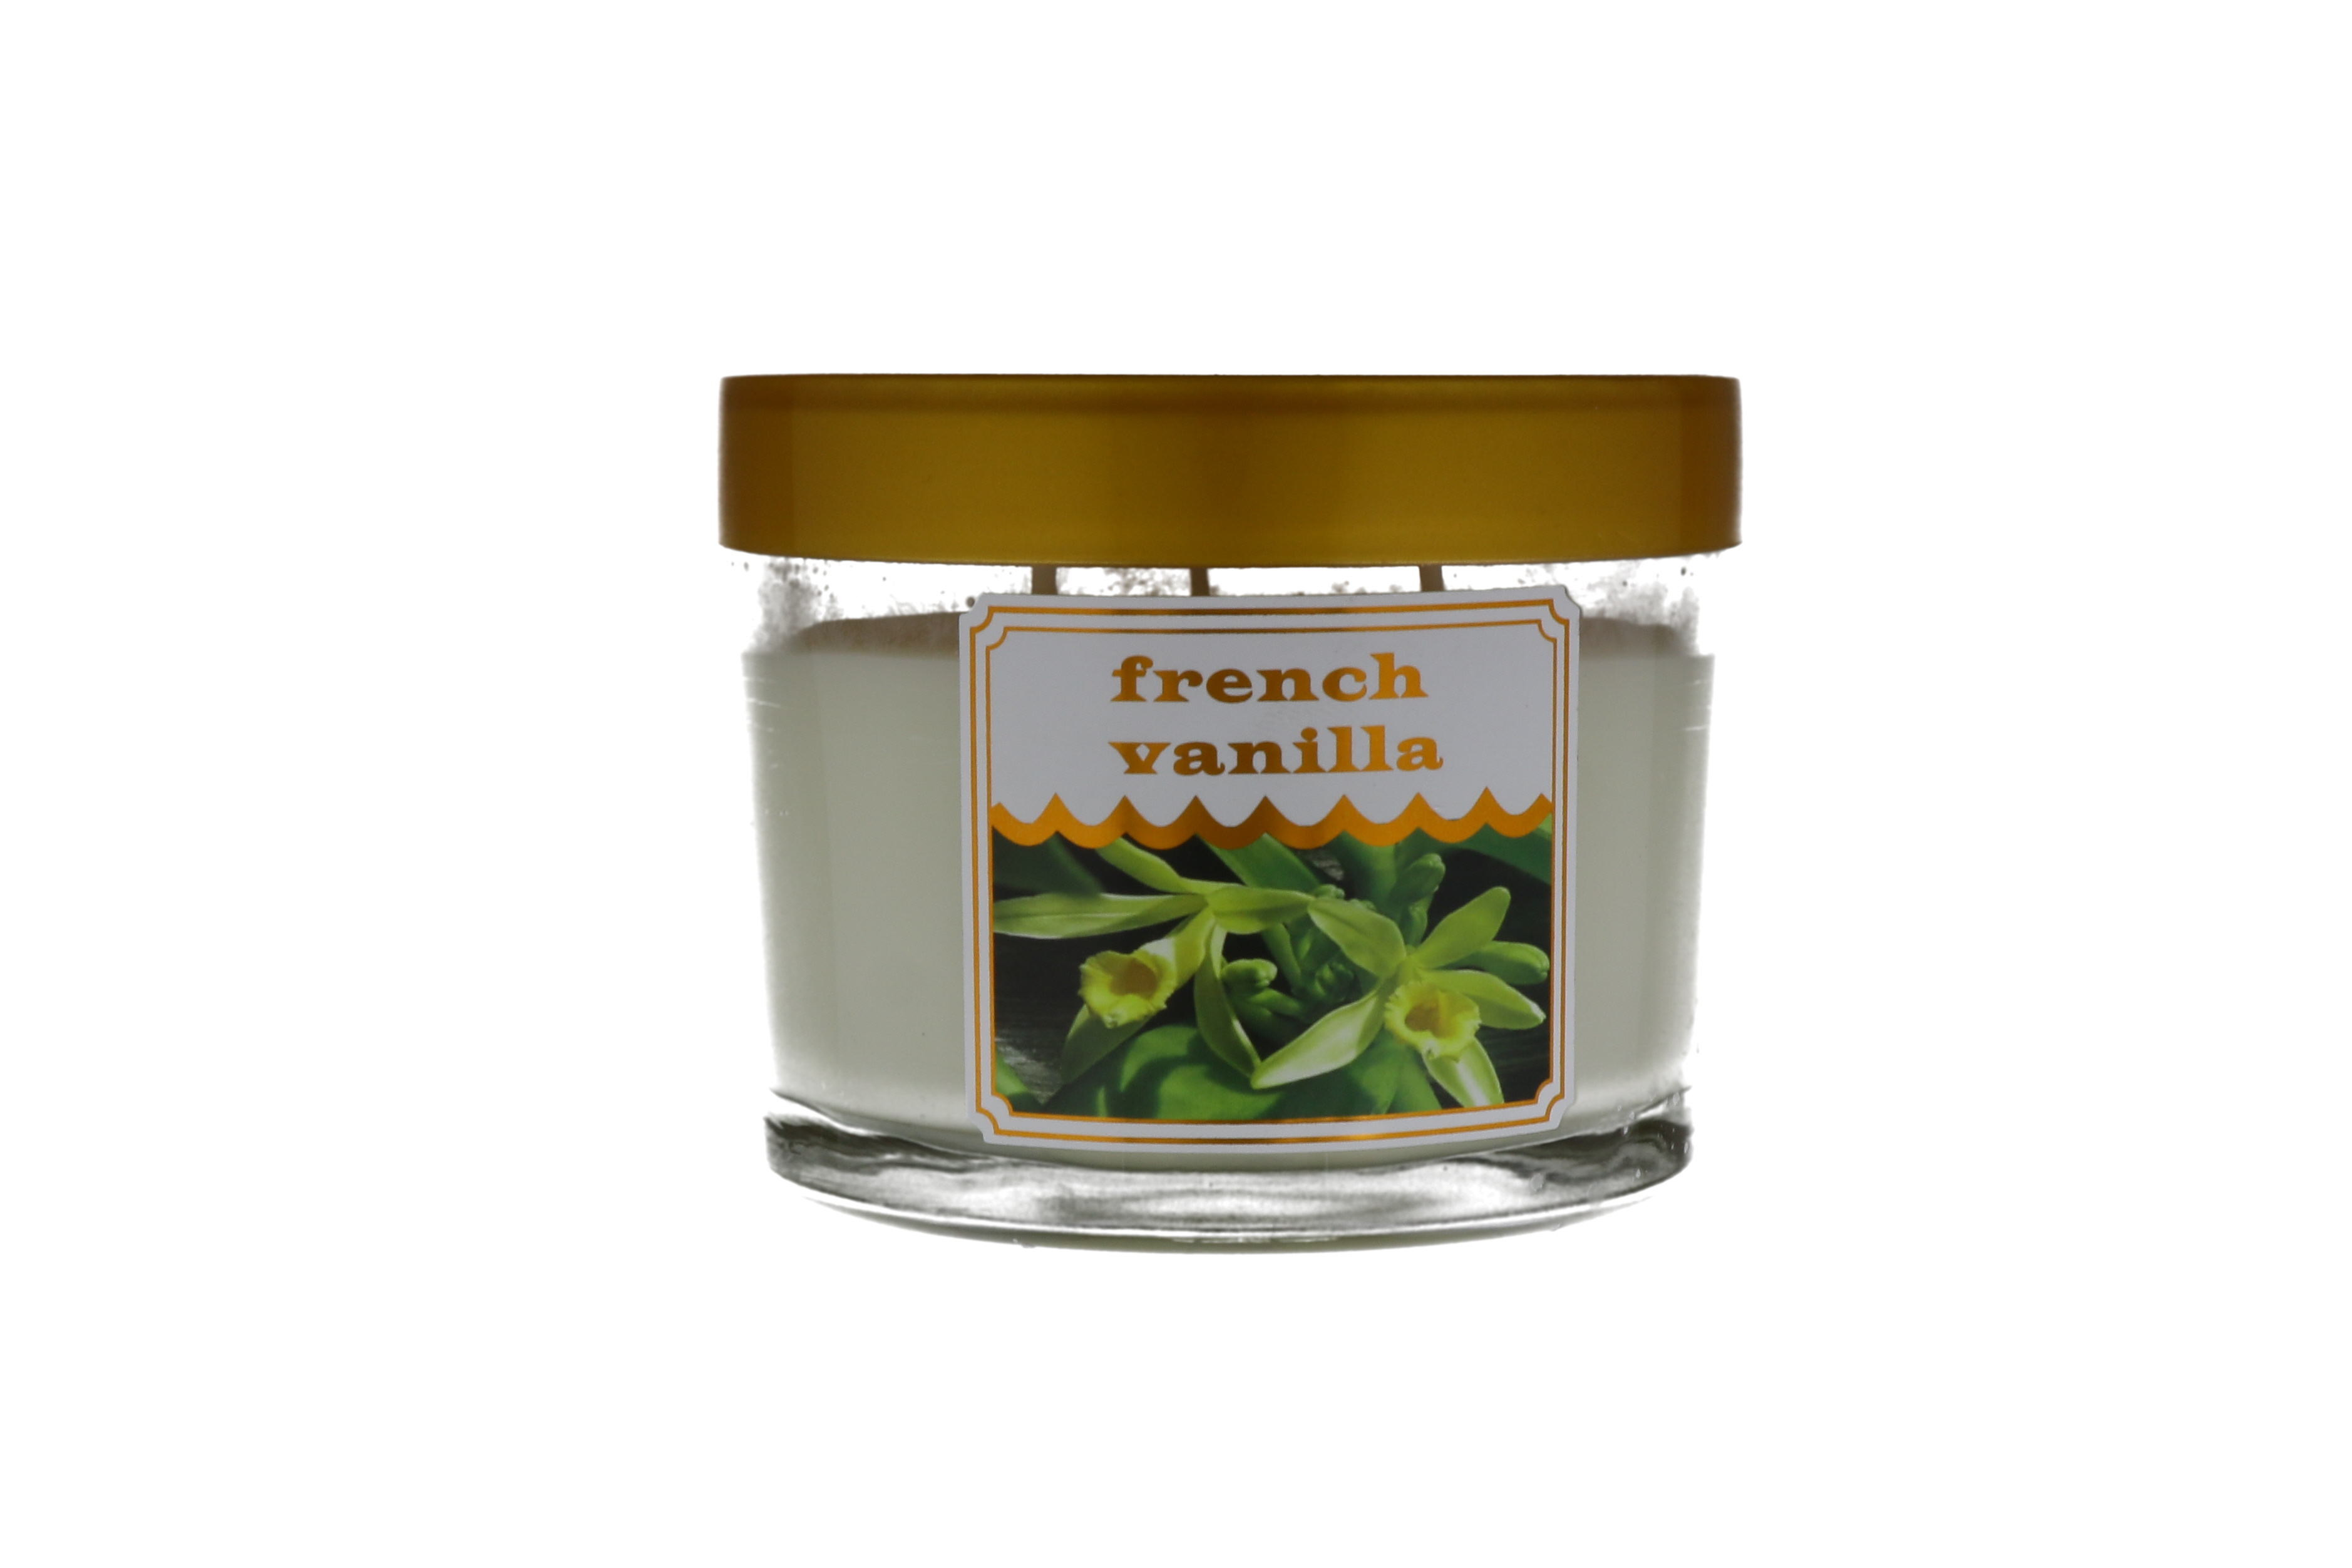 2.99 FRENCH VANILLA CANDLE